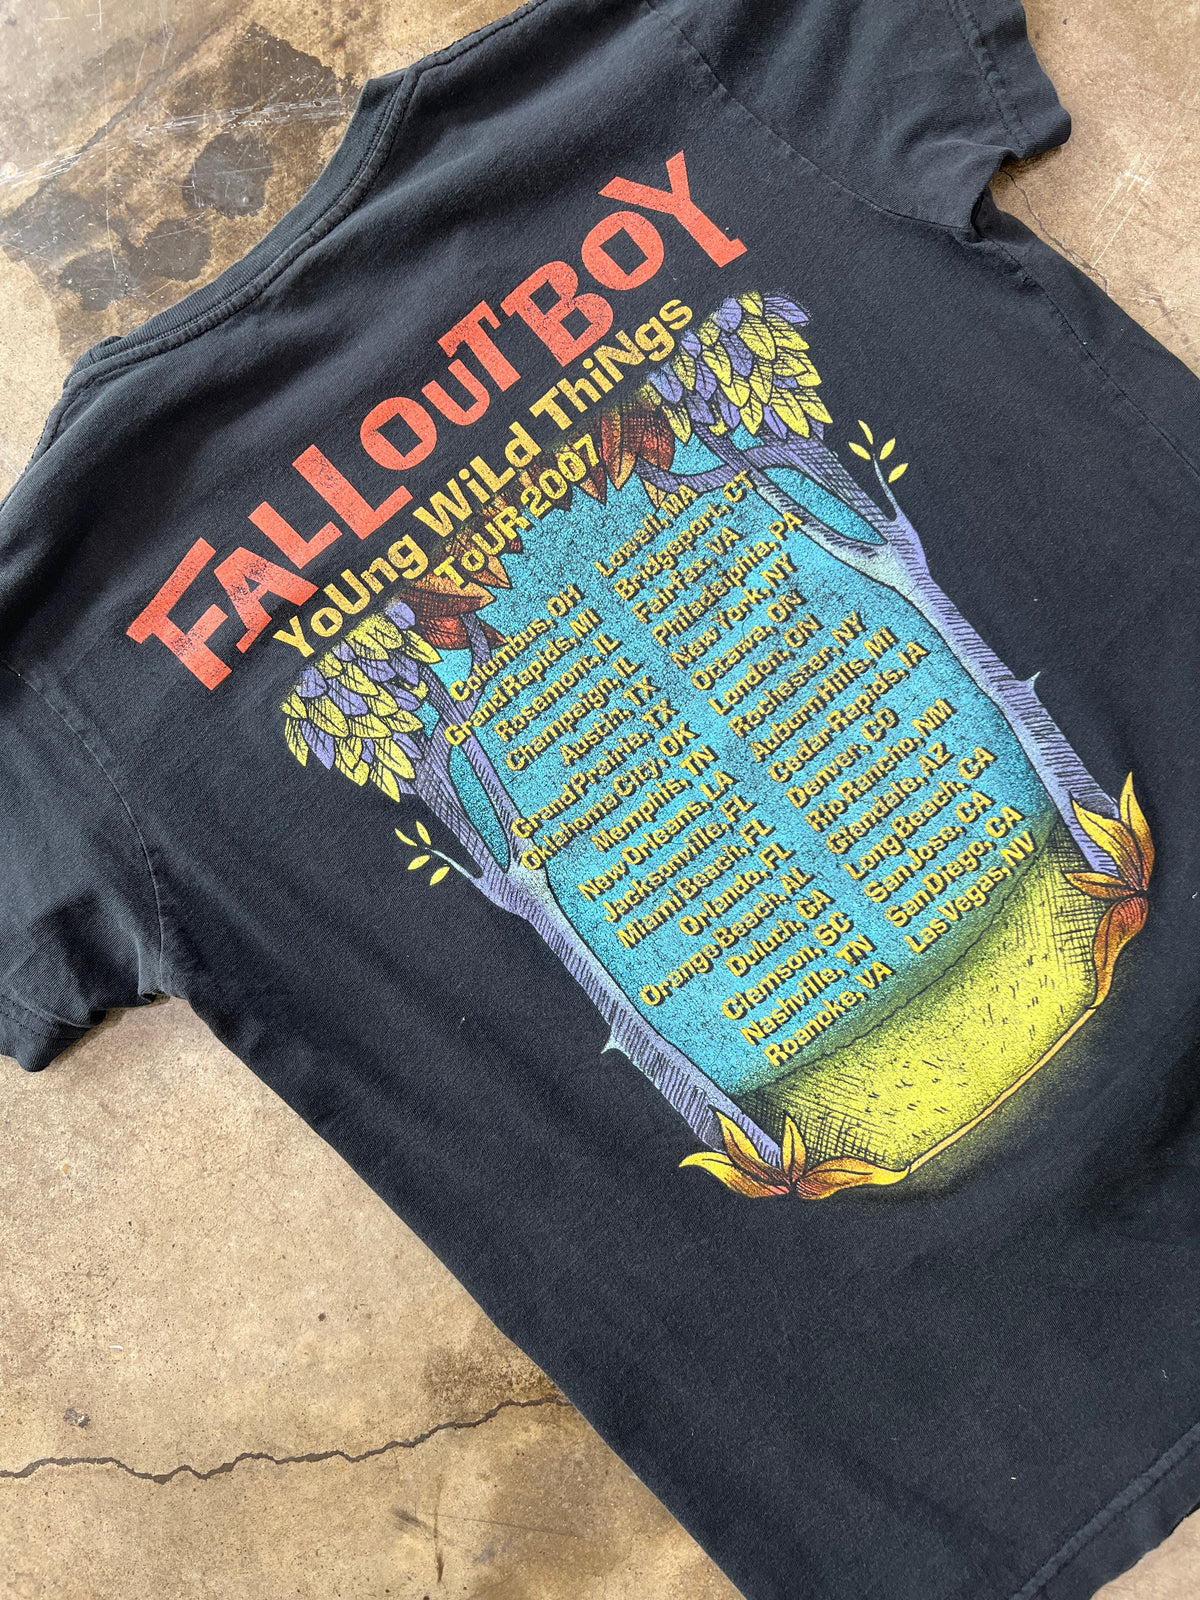 Fall Out Boys Tour Young Wild Things Tee